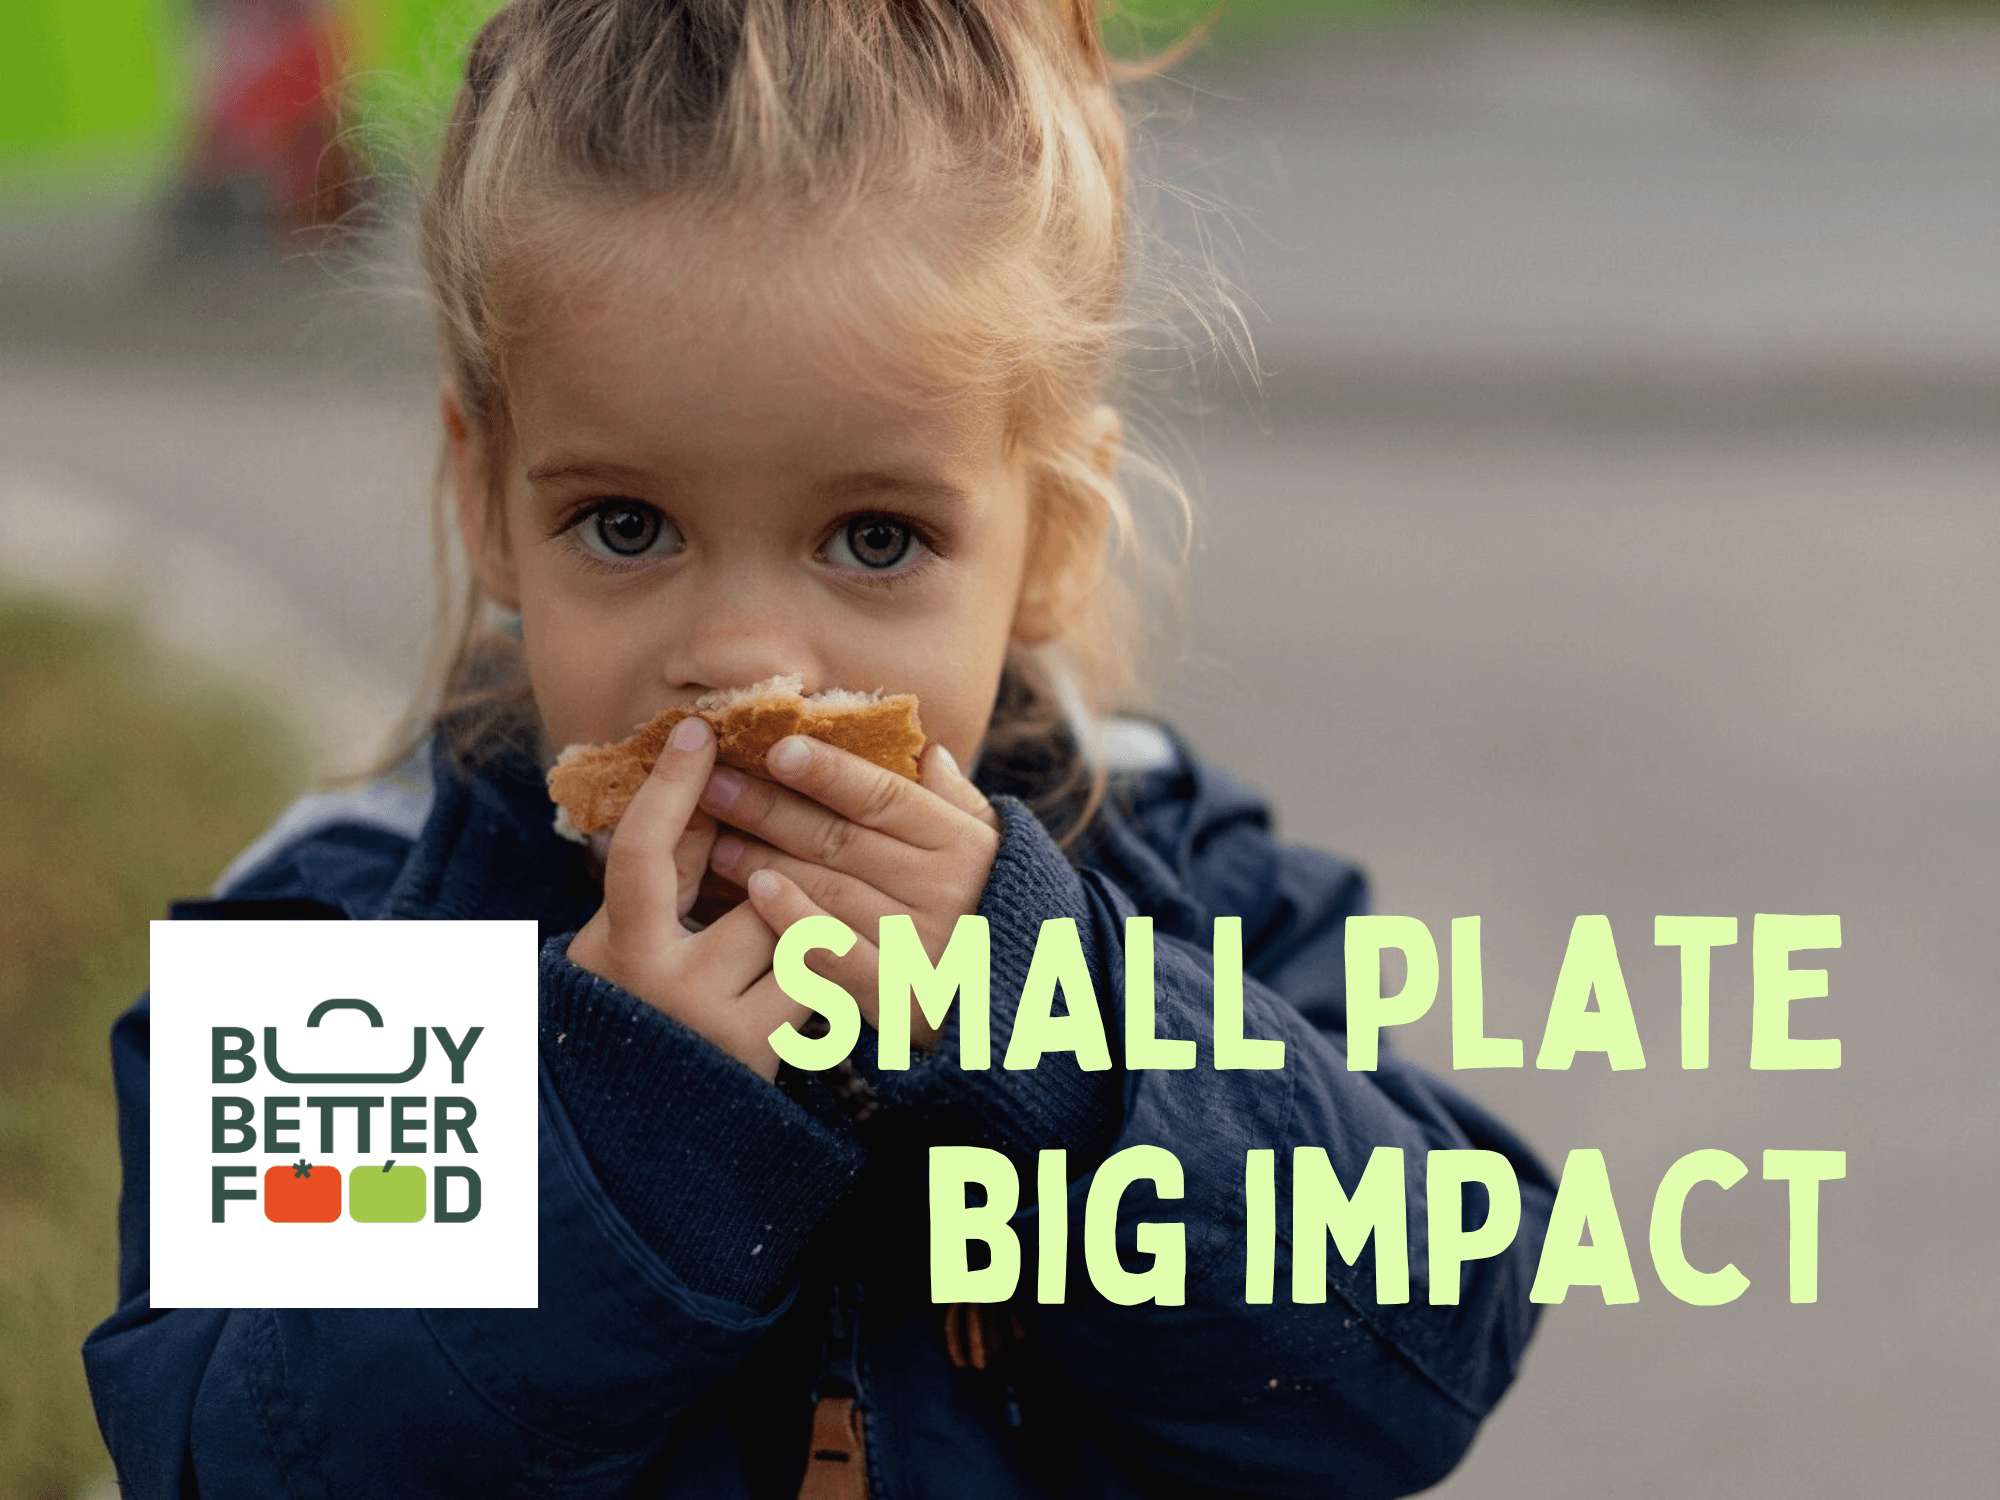 Small plate, big impact: SF4C supports the new petition on healthy school meals  